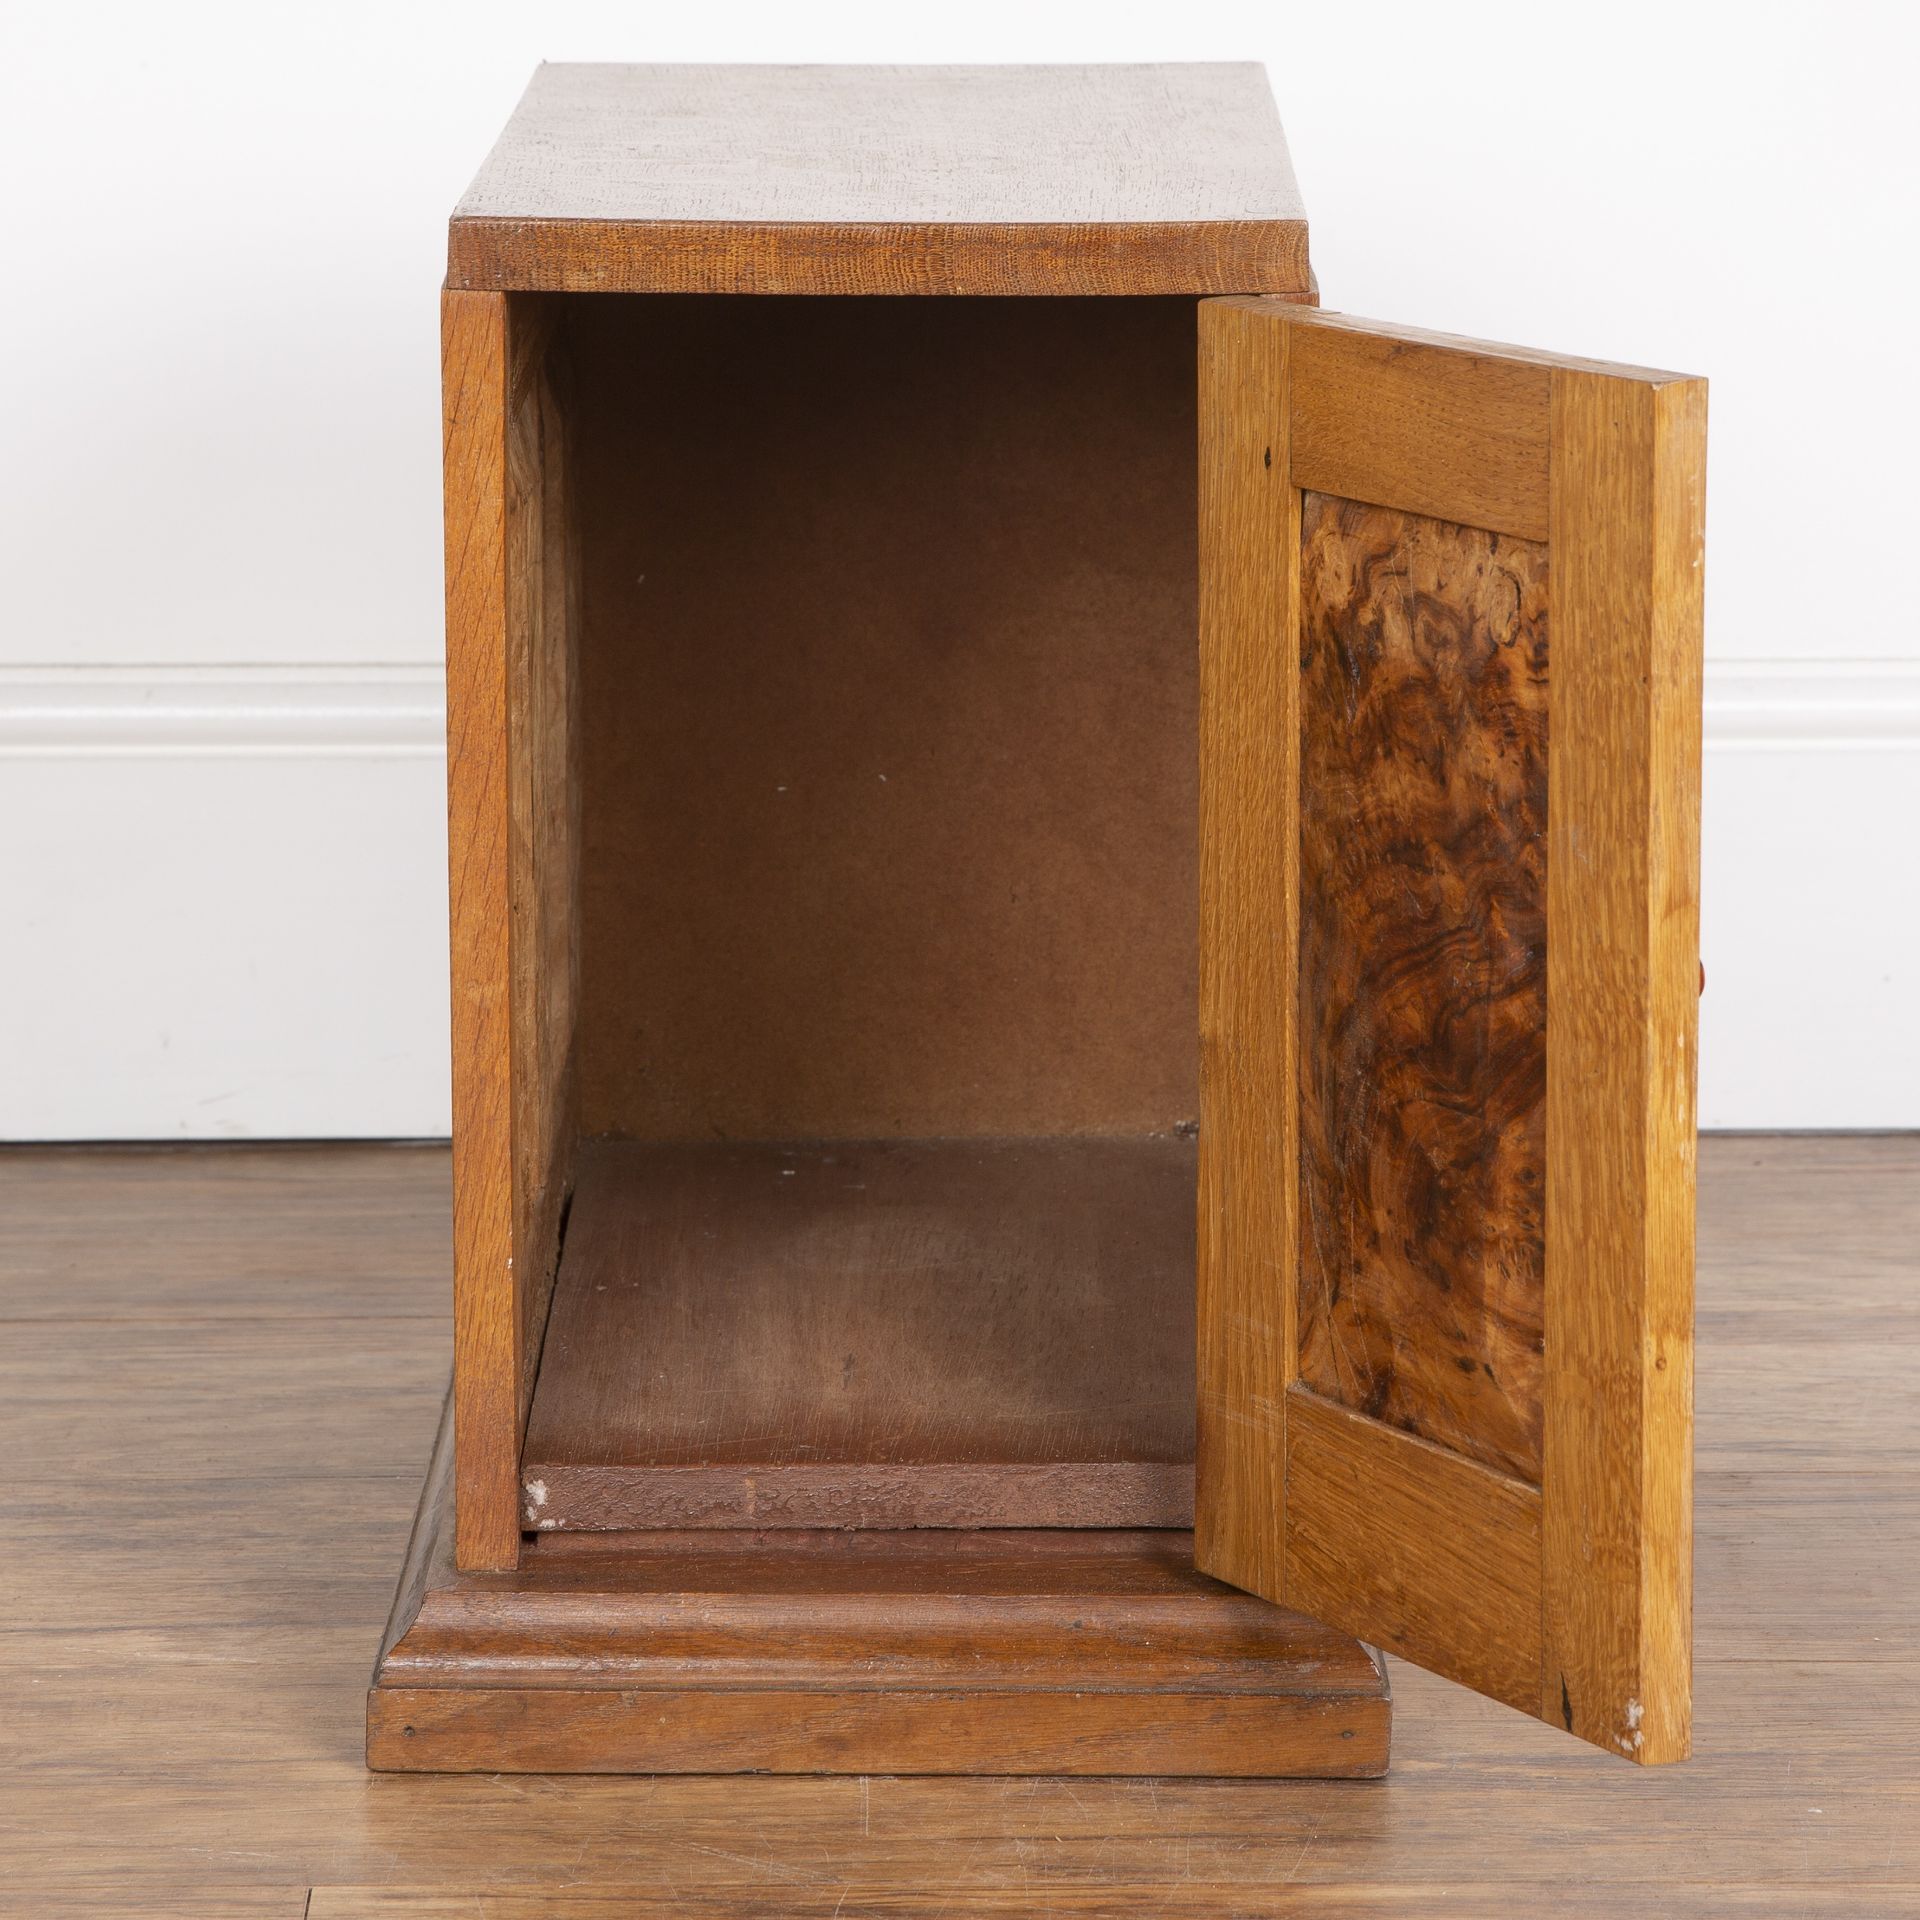 Cotswold School oak and burr walnut tabletop cupboard, with panelled doors and sides, on plinth - Image 2 of 5